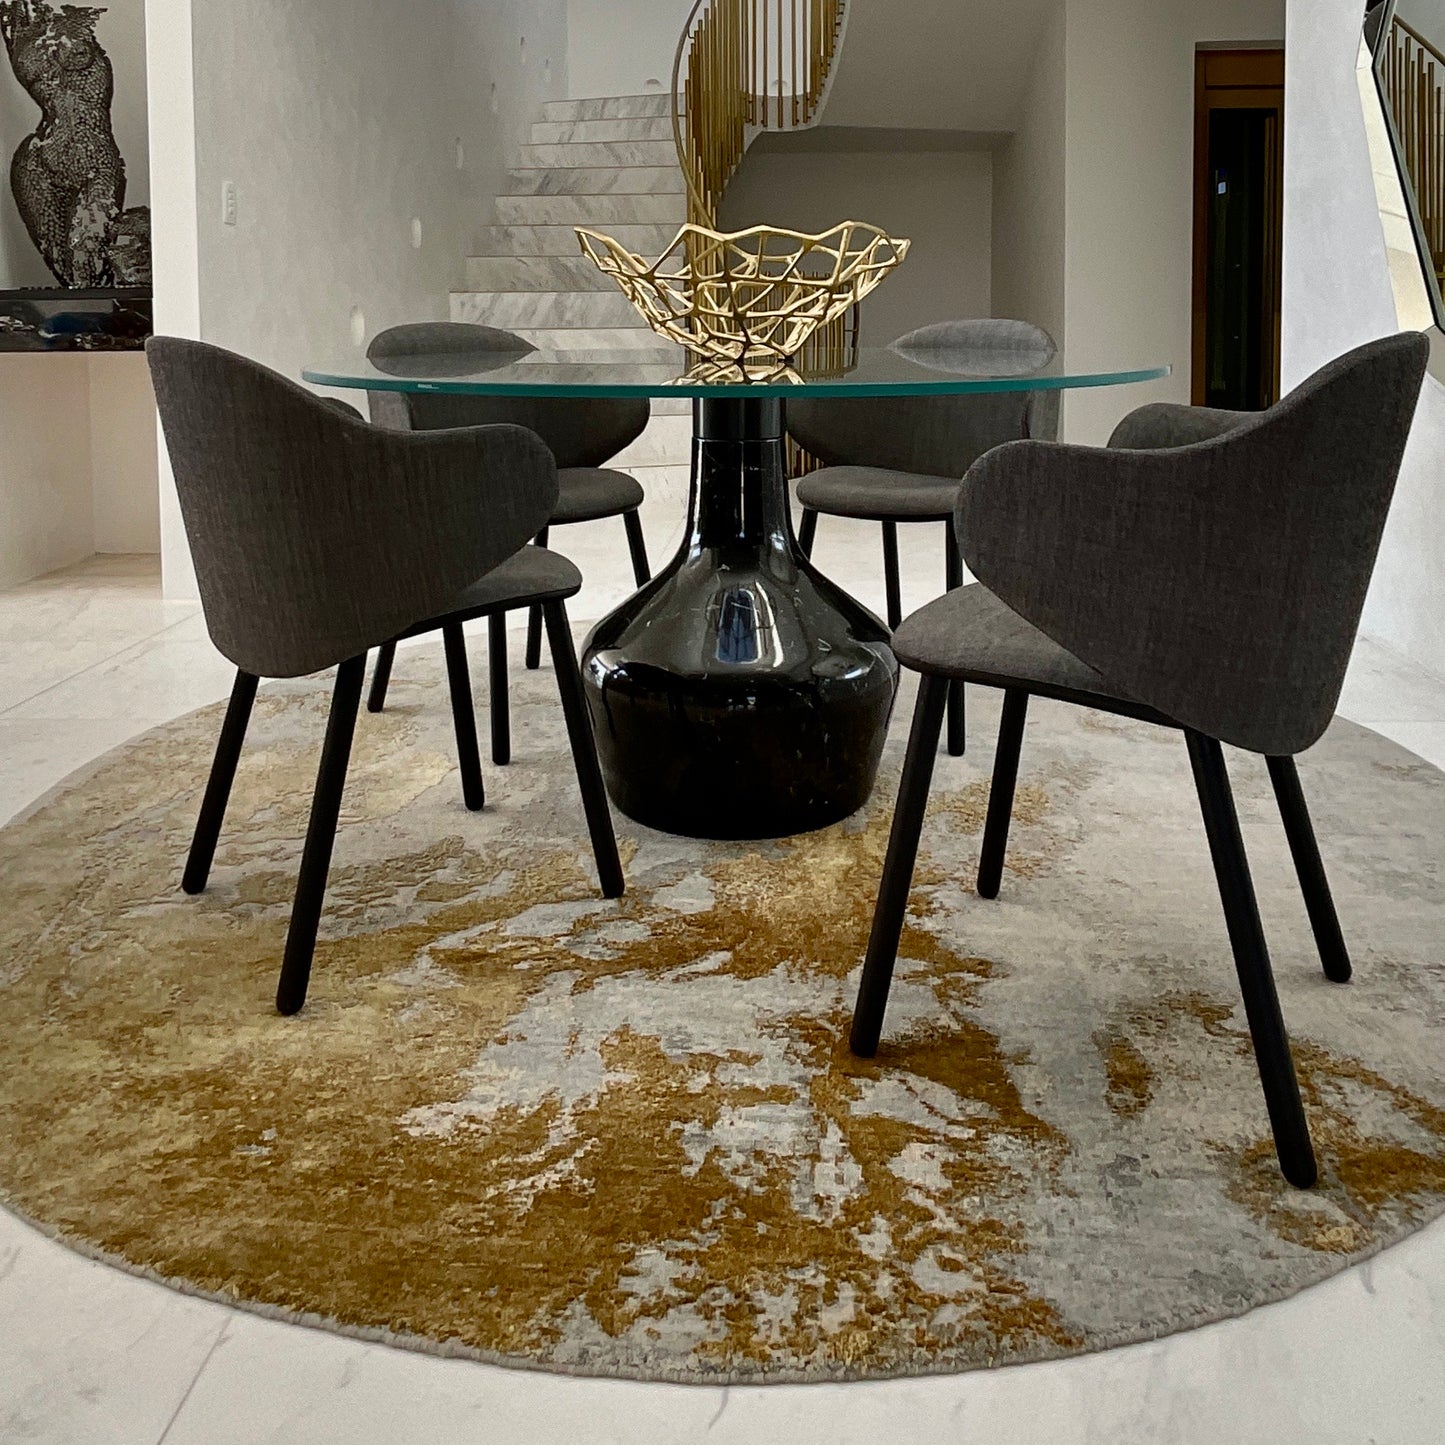 Set of FOUR Dua Dining Chair by Läufer & Keichel for Kristalia